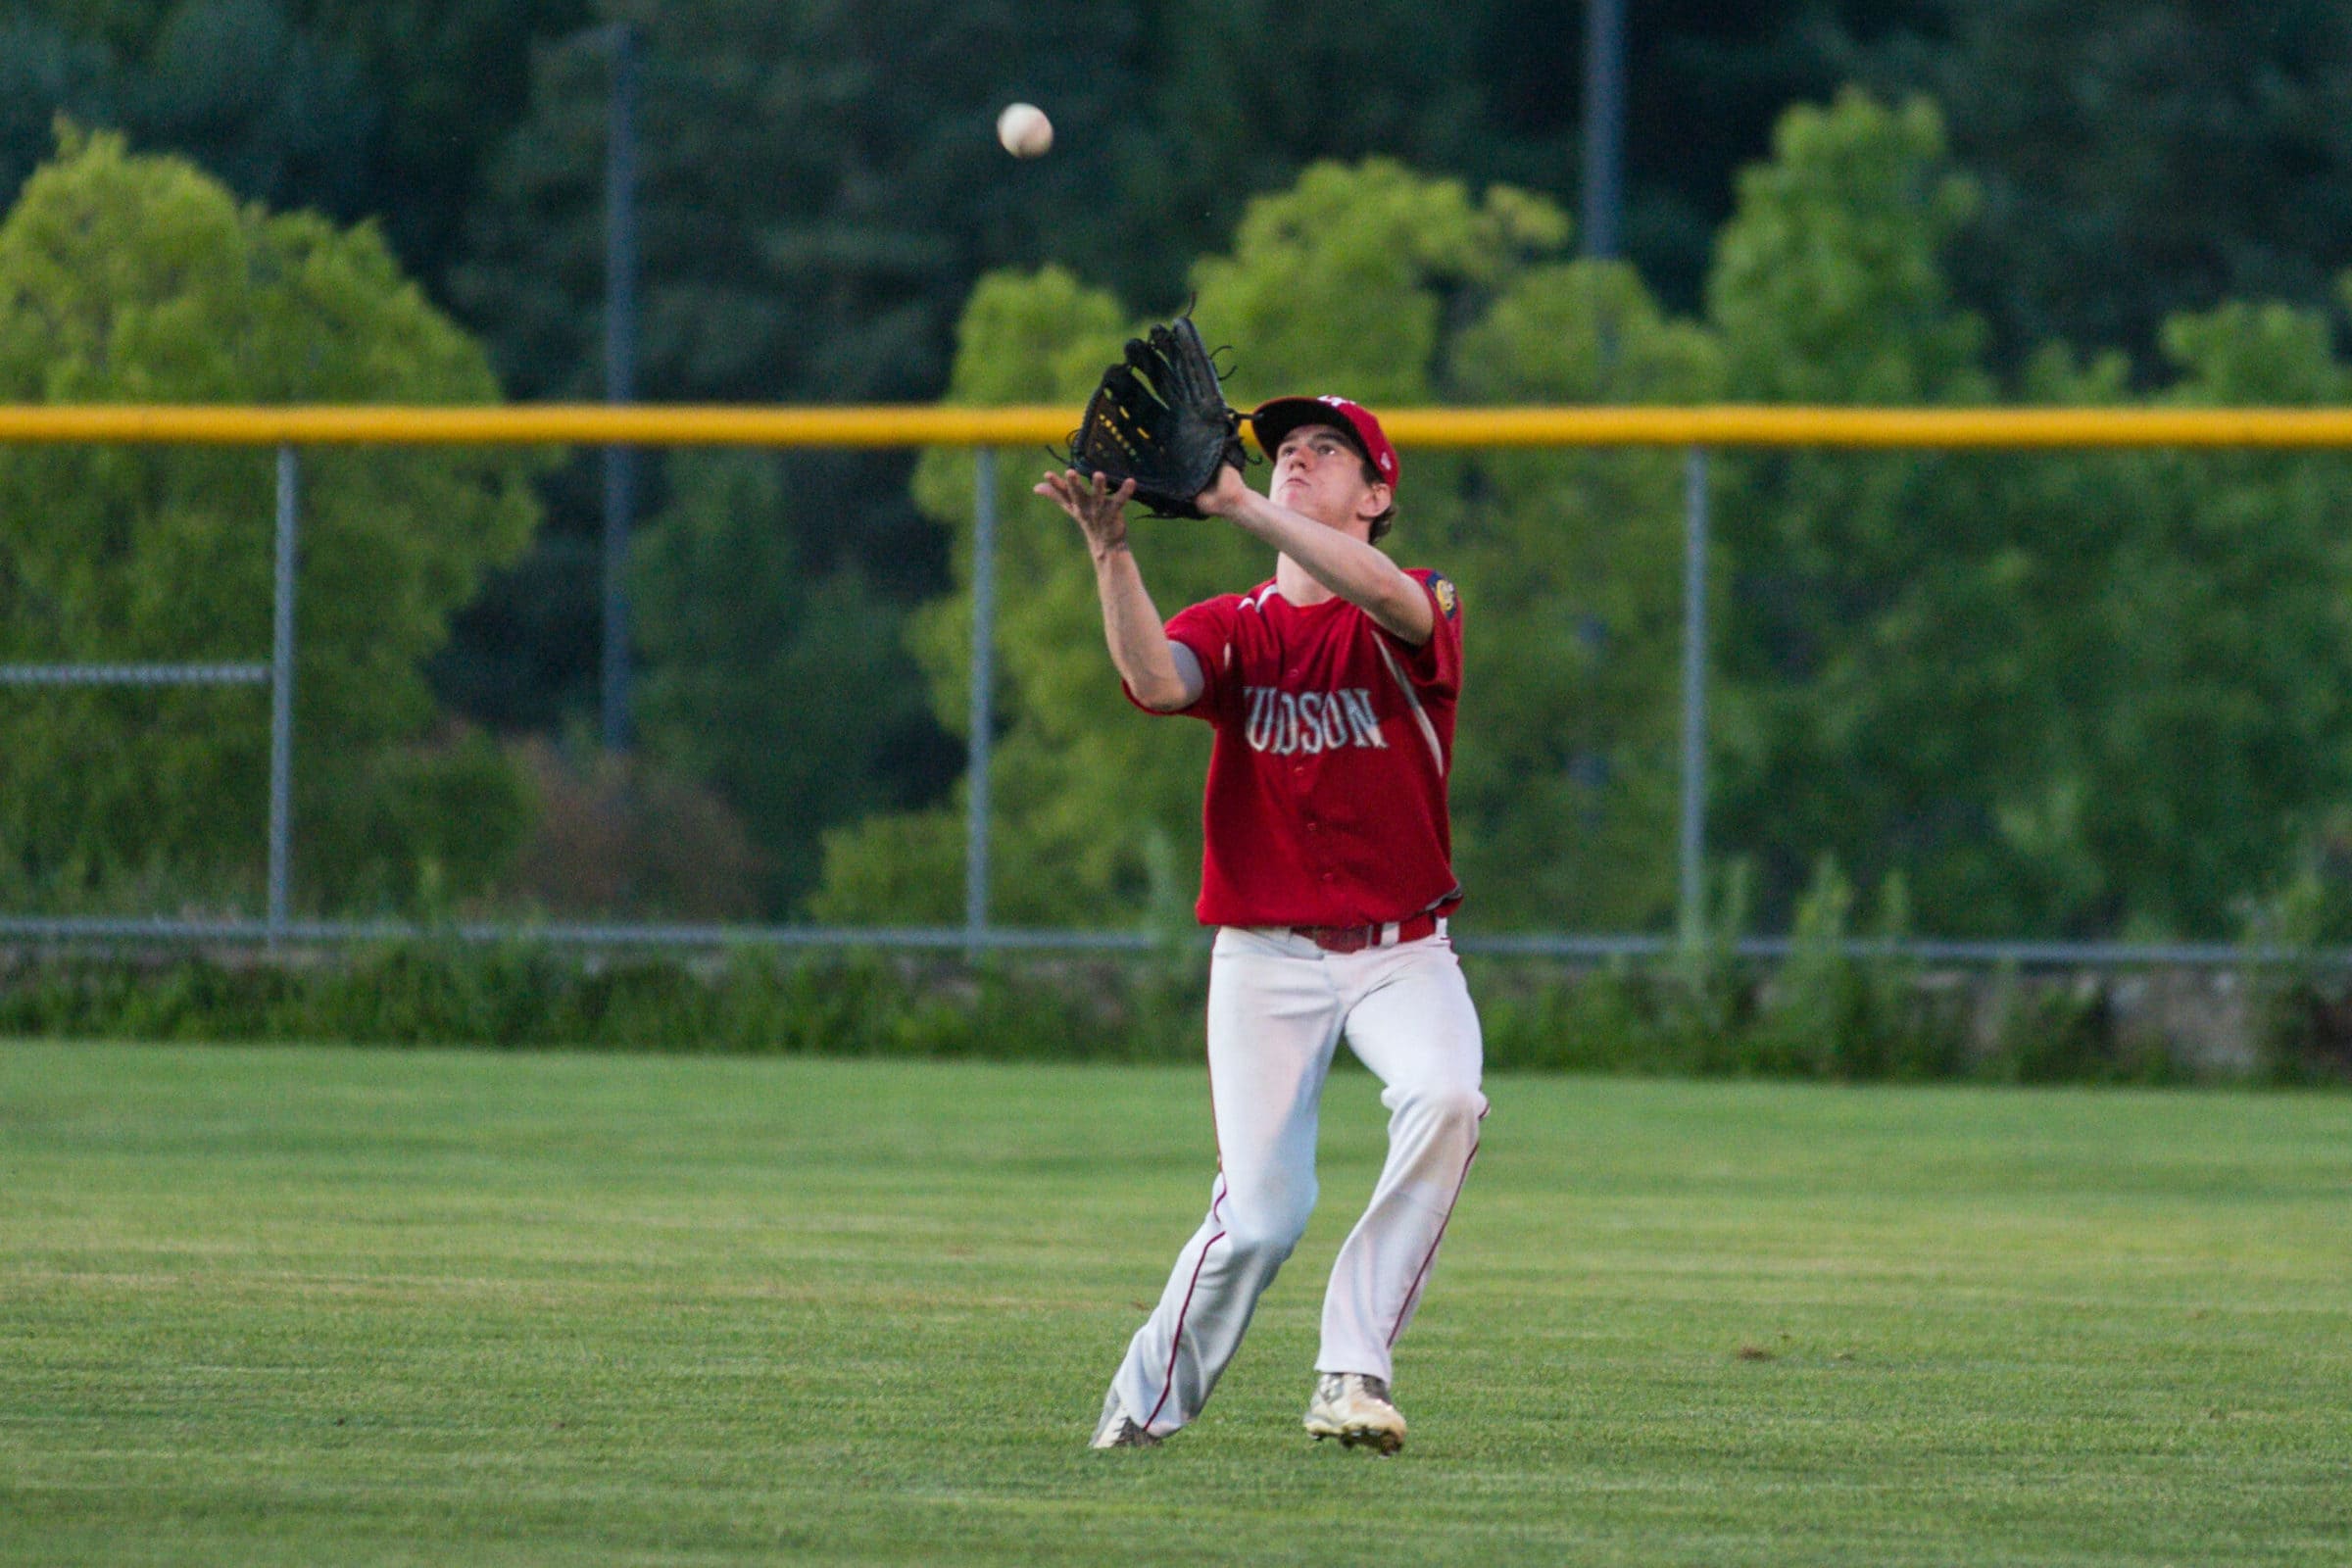 A Hudson outfielder snags a pop fly driven in his direction during his team’s July 28 game against Natick.